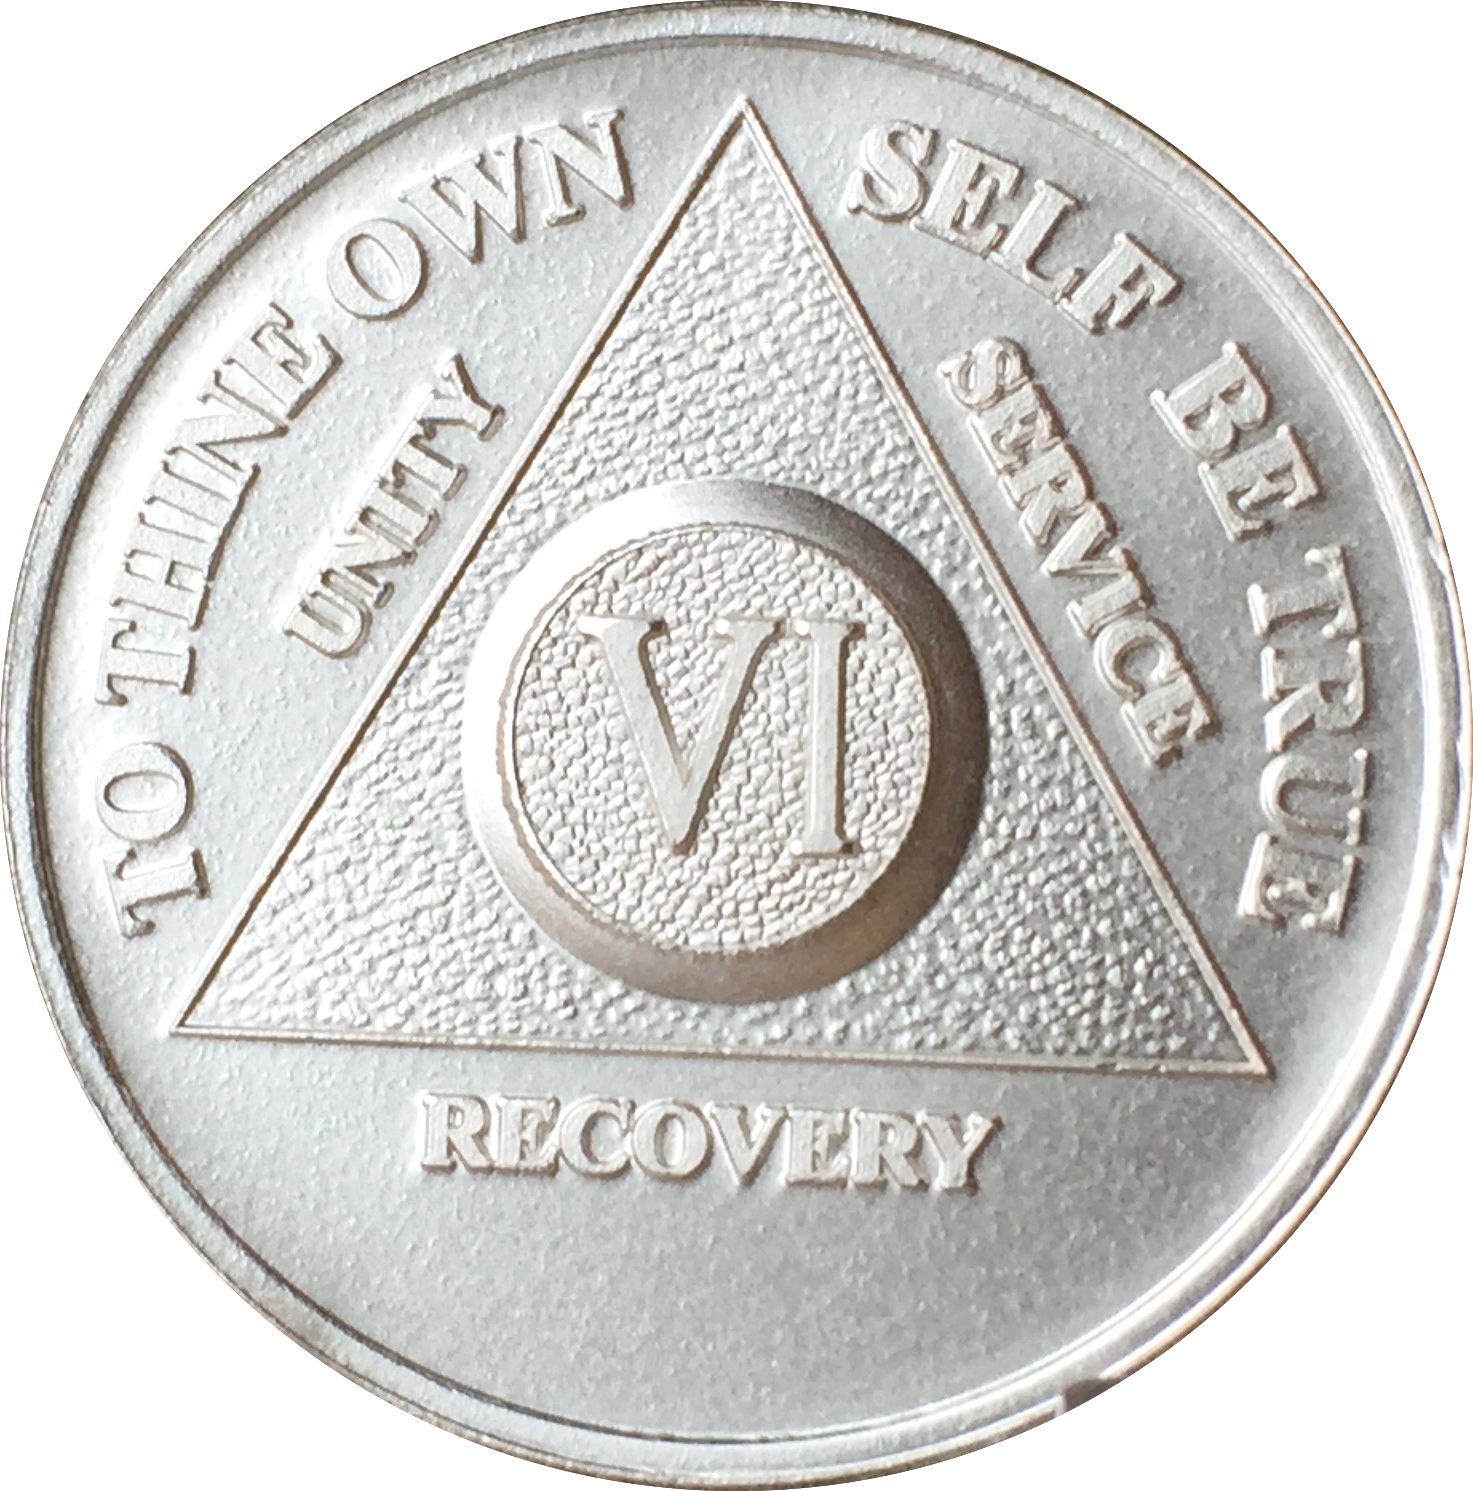 6 Year .999 Fine Silver AA Alcoholics Anonymous Medallion Chip Coin VI Six